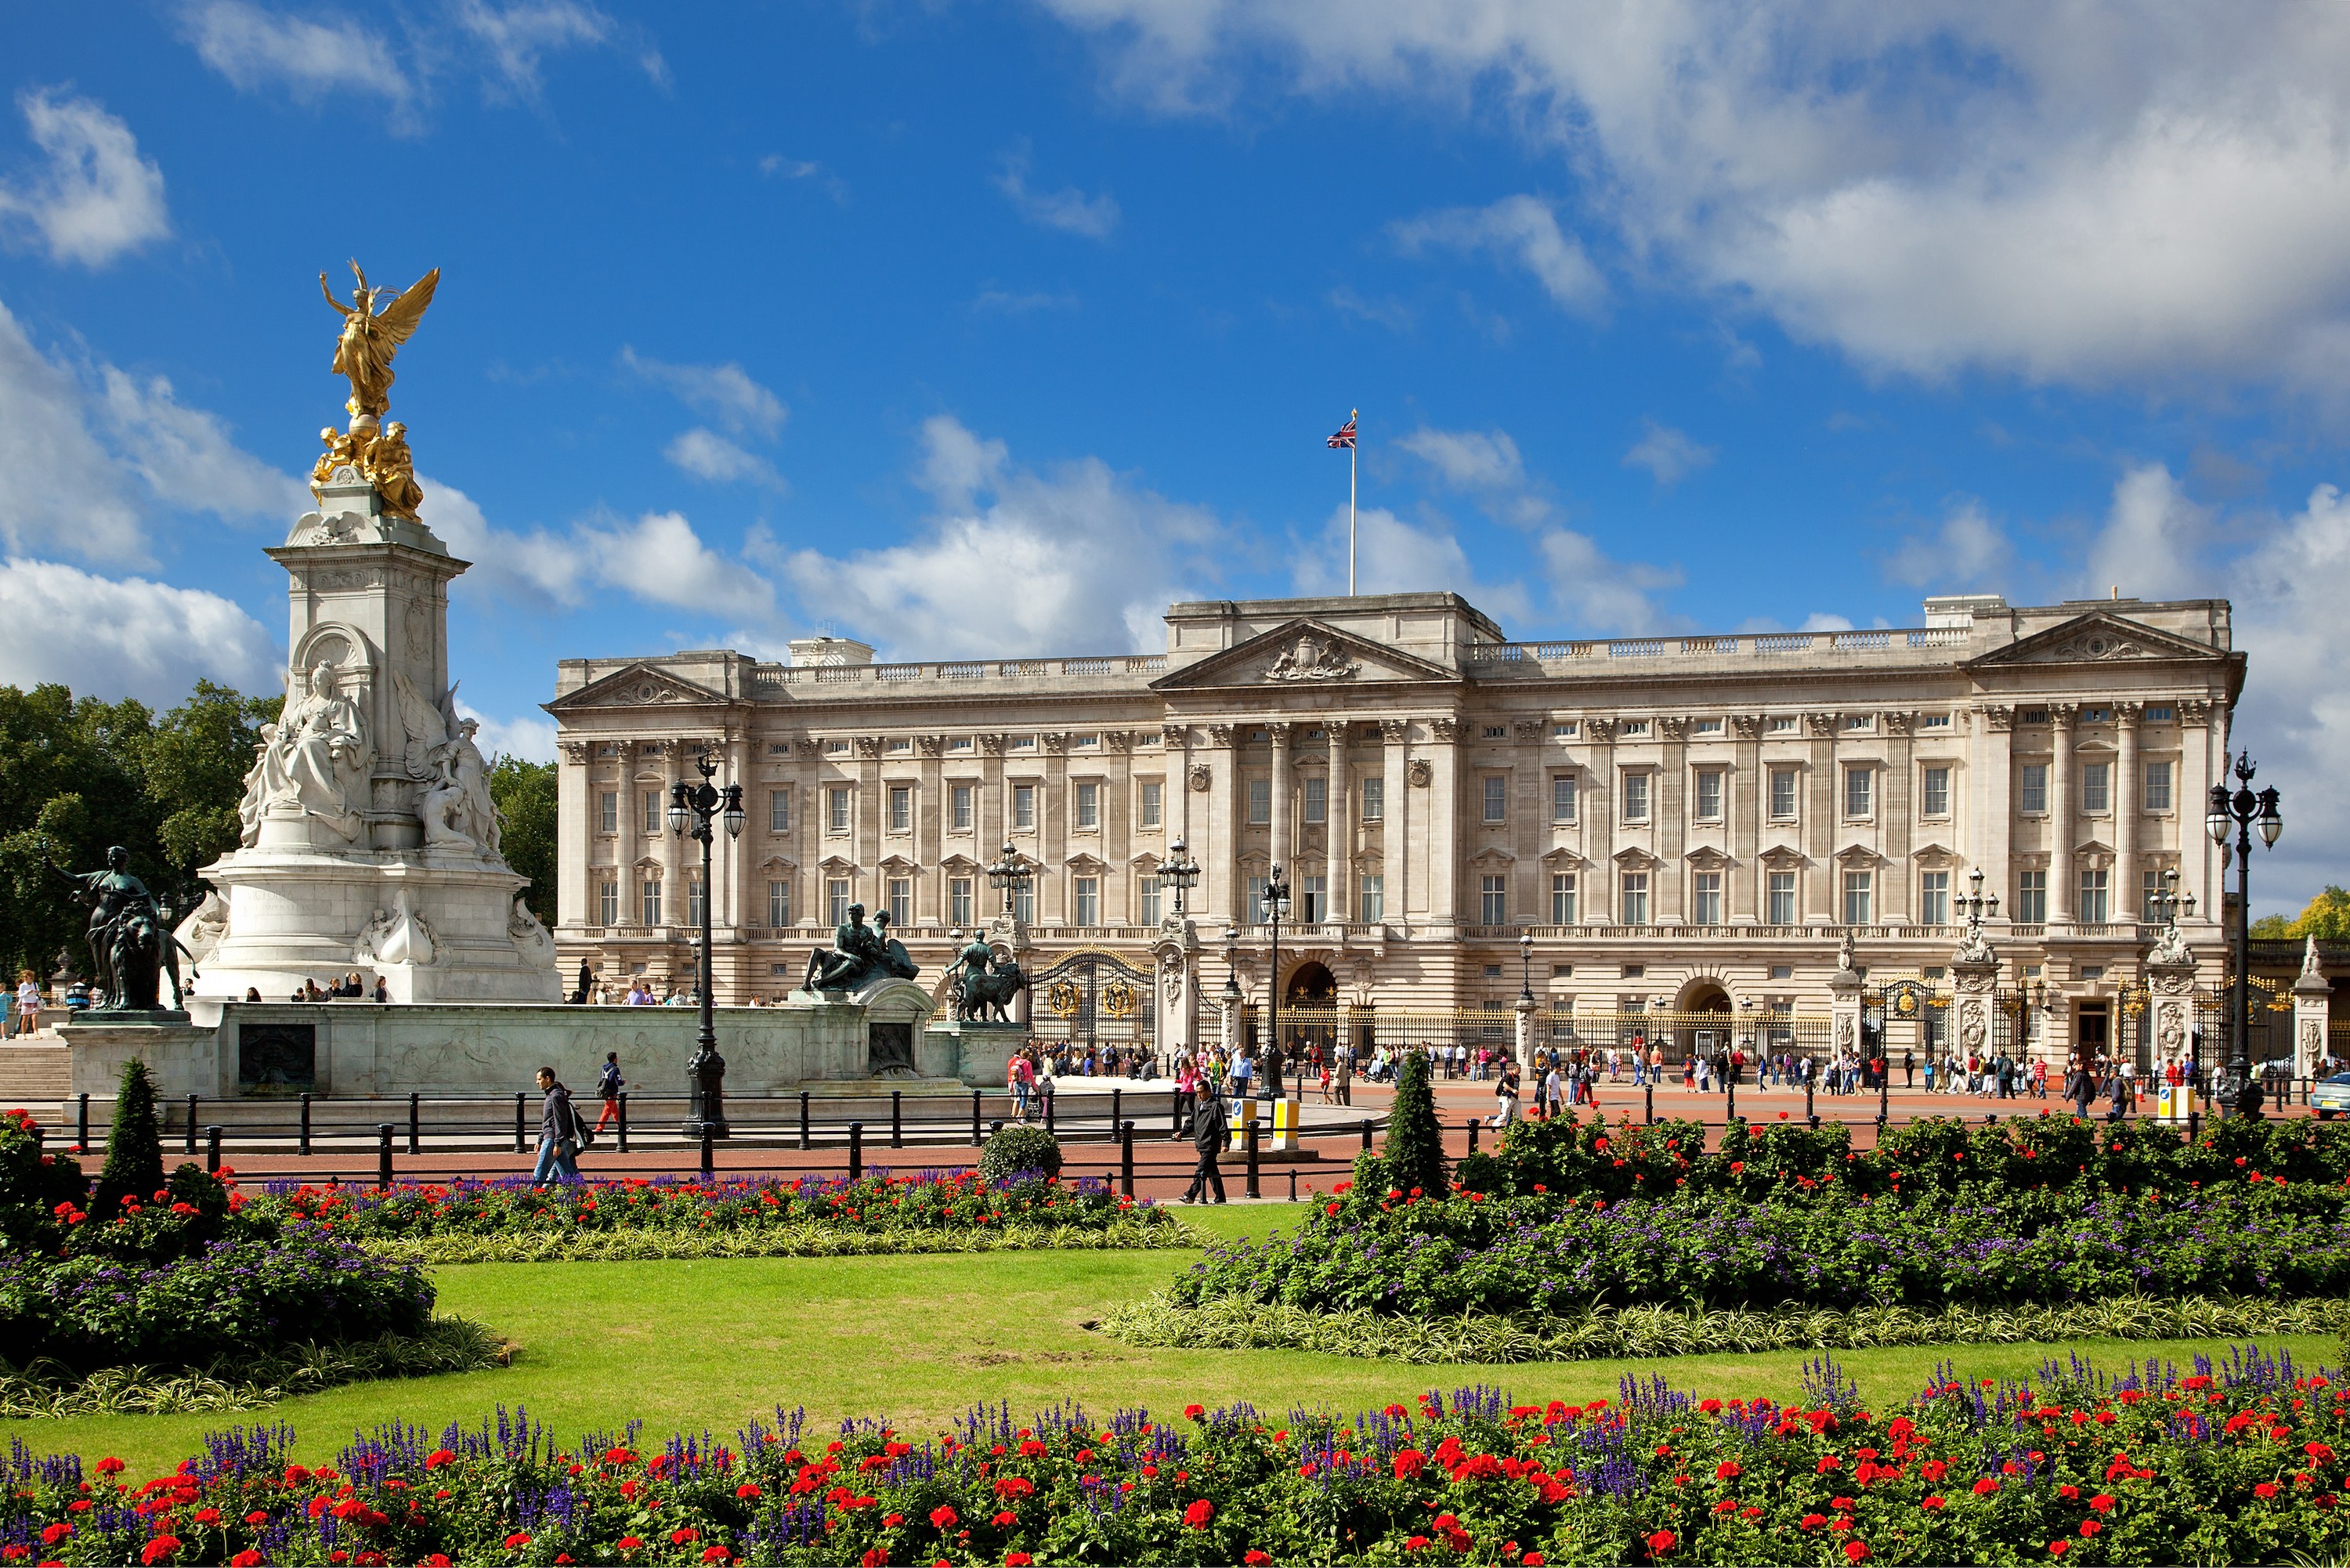 6 Things You Never Knew About Buckingham Palace | Architectural Digest